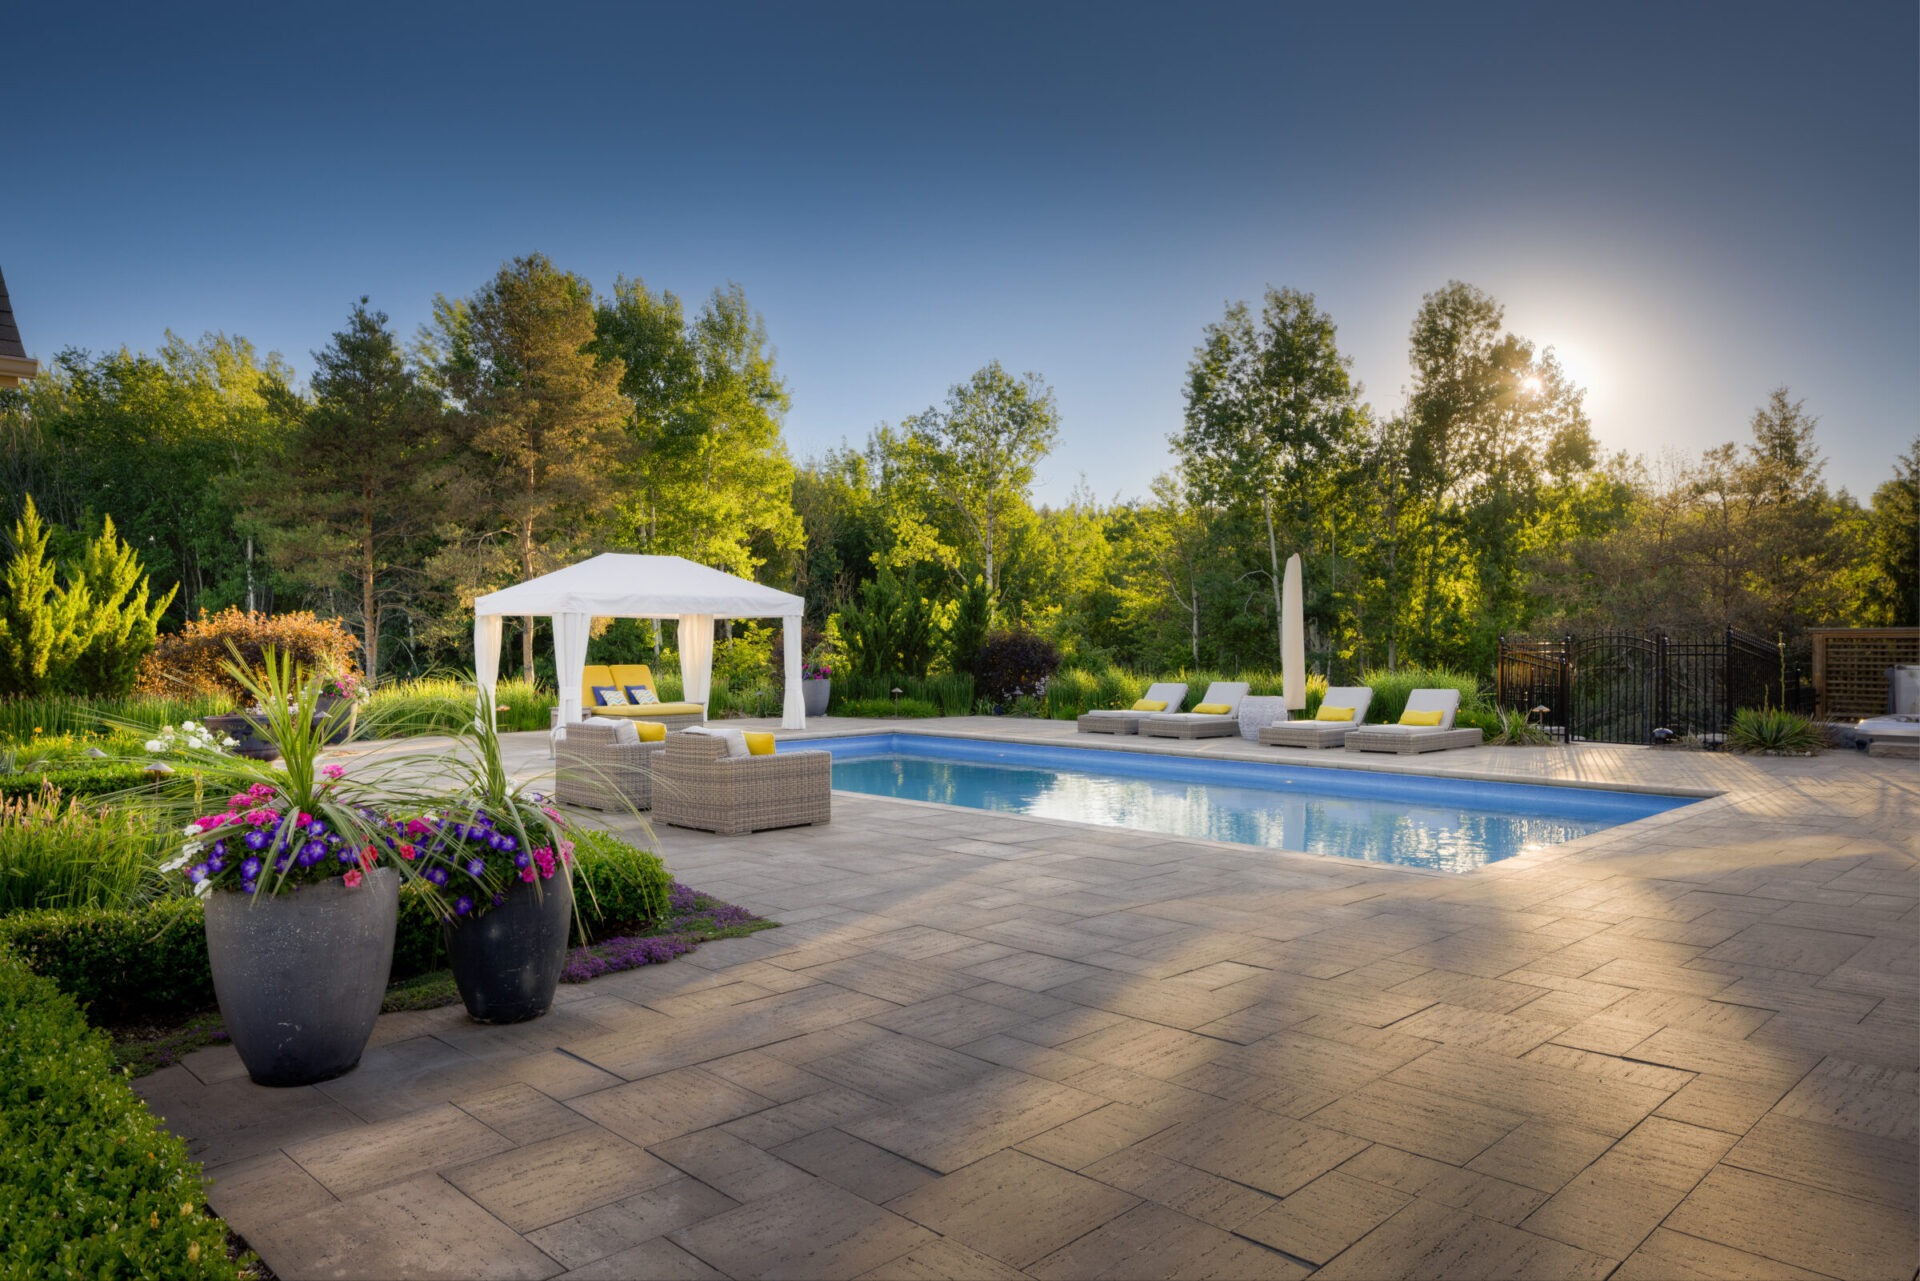 An outdoor pool area with loungers, a gazebo, and large planters surrounded by lush landscaping. The setting sun creates a tranquil atmosphere.